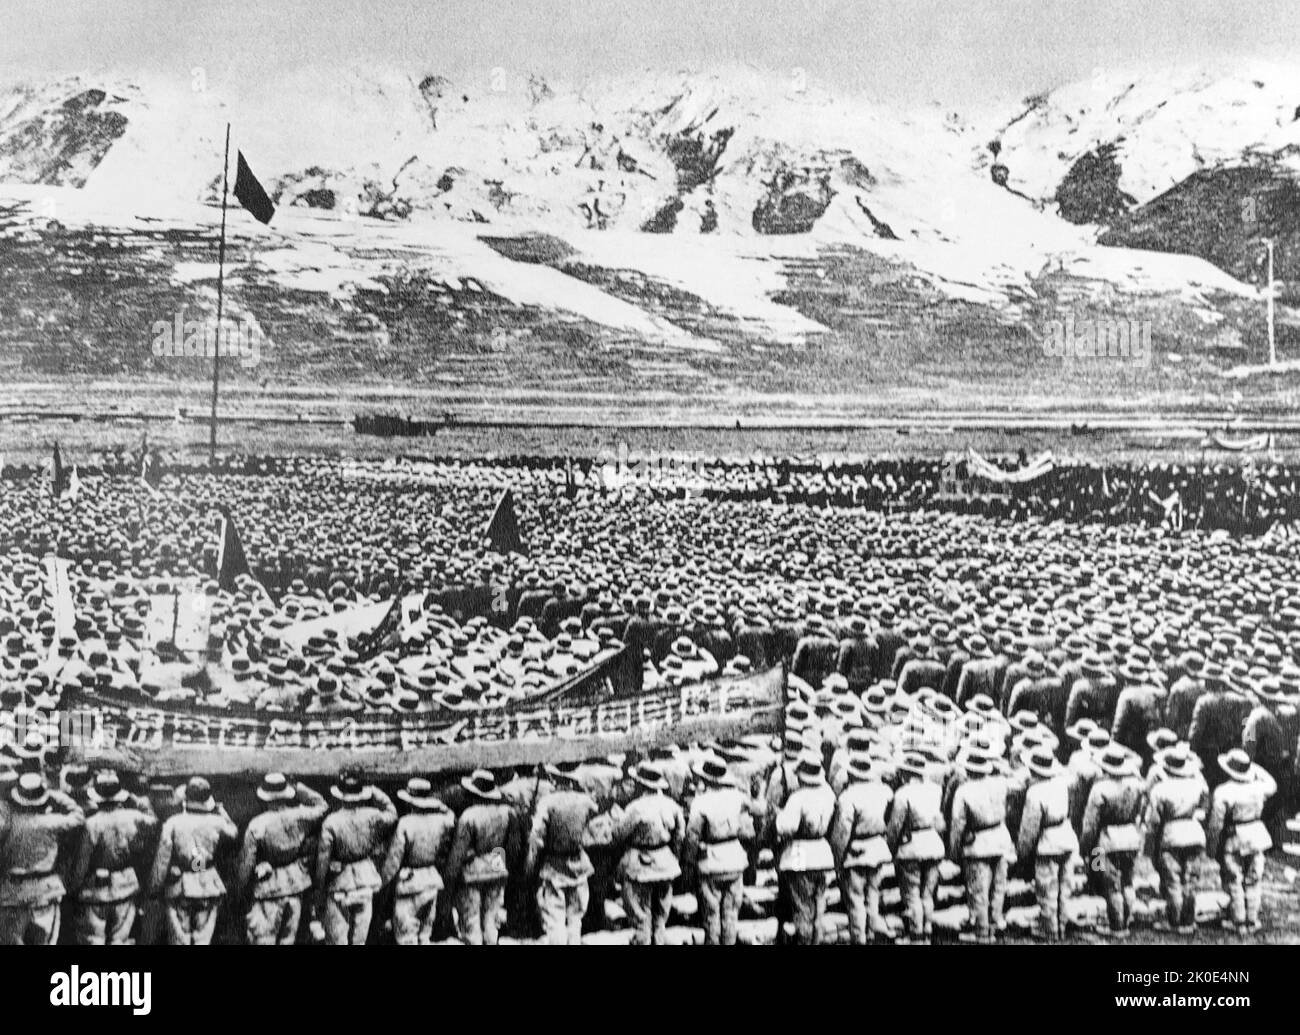 Chinese troops assembled for the 1950 Communist Chinese government invasion of Tibet. Asserting that Tibet was not an independent country but merely a part of China. The small and poorly equipped Tibetan army was unable to provide effective resistance against the PLA (People's Liberation Army) and was completely killed or captured. Stock Photo